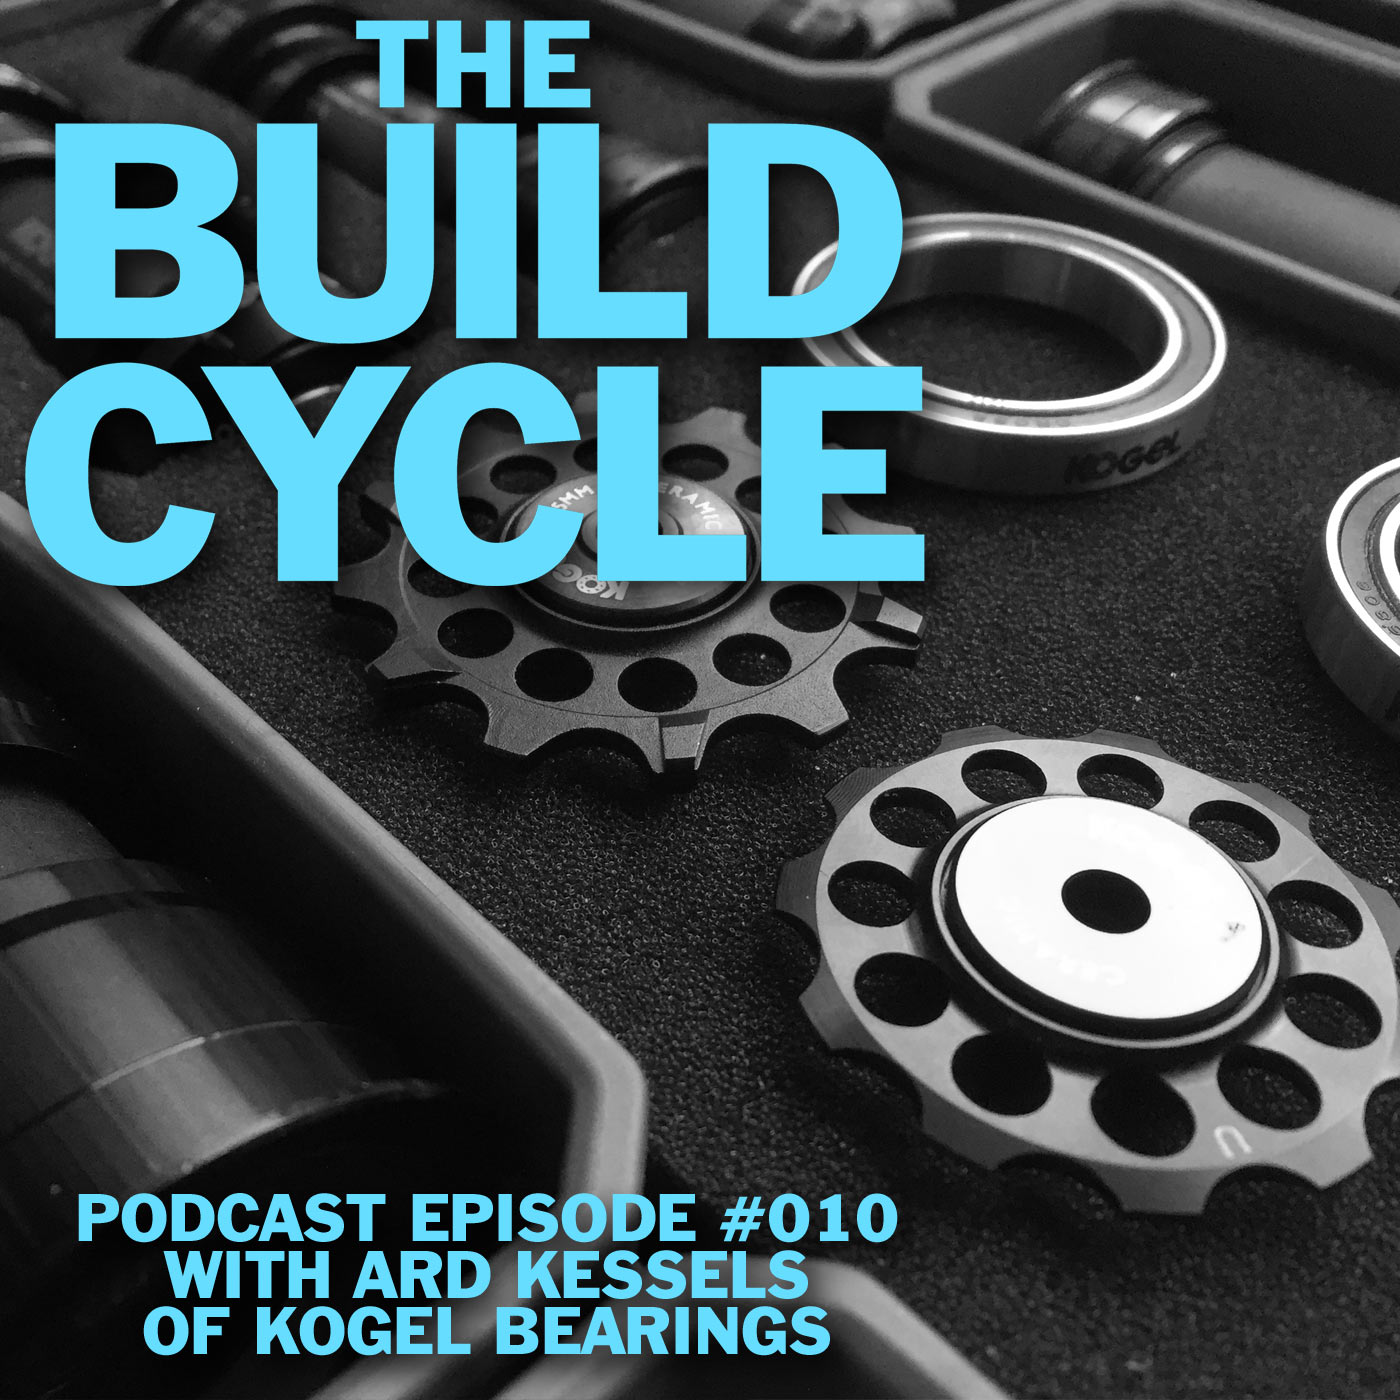 Ep #010 - Launch a Company While Living Abroad w/ Kogel Bearings’ Ard Kessels